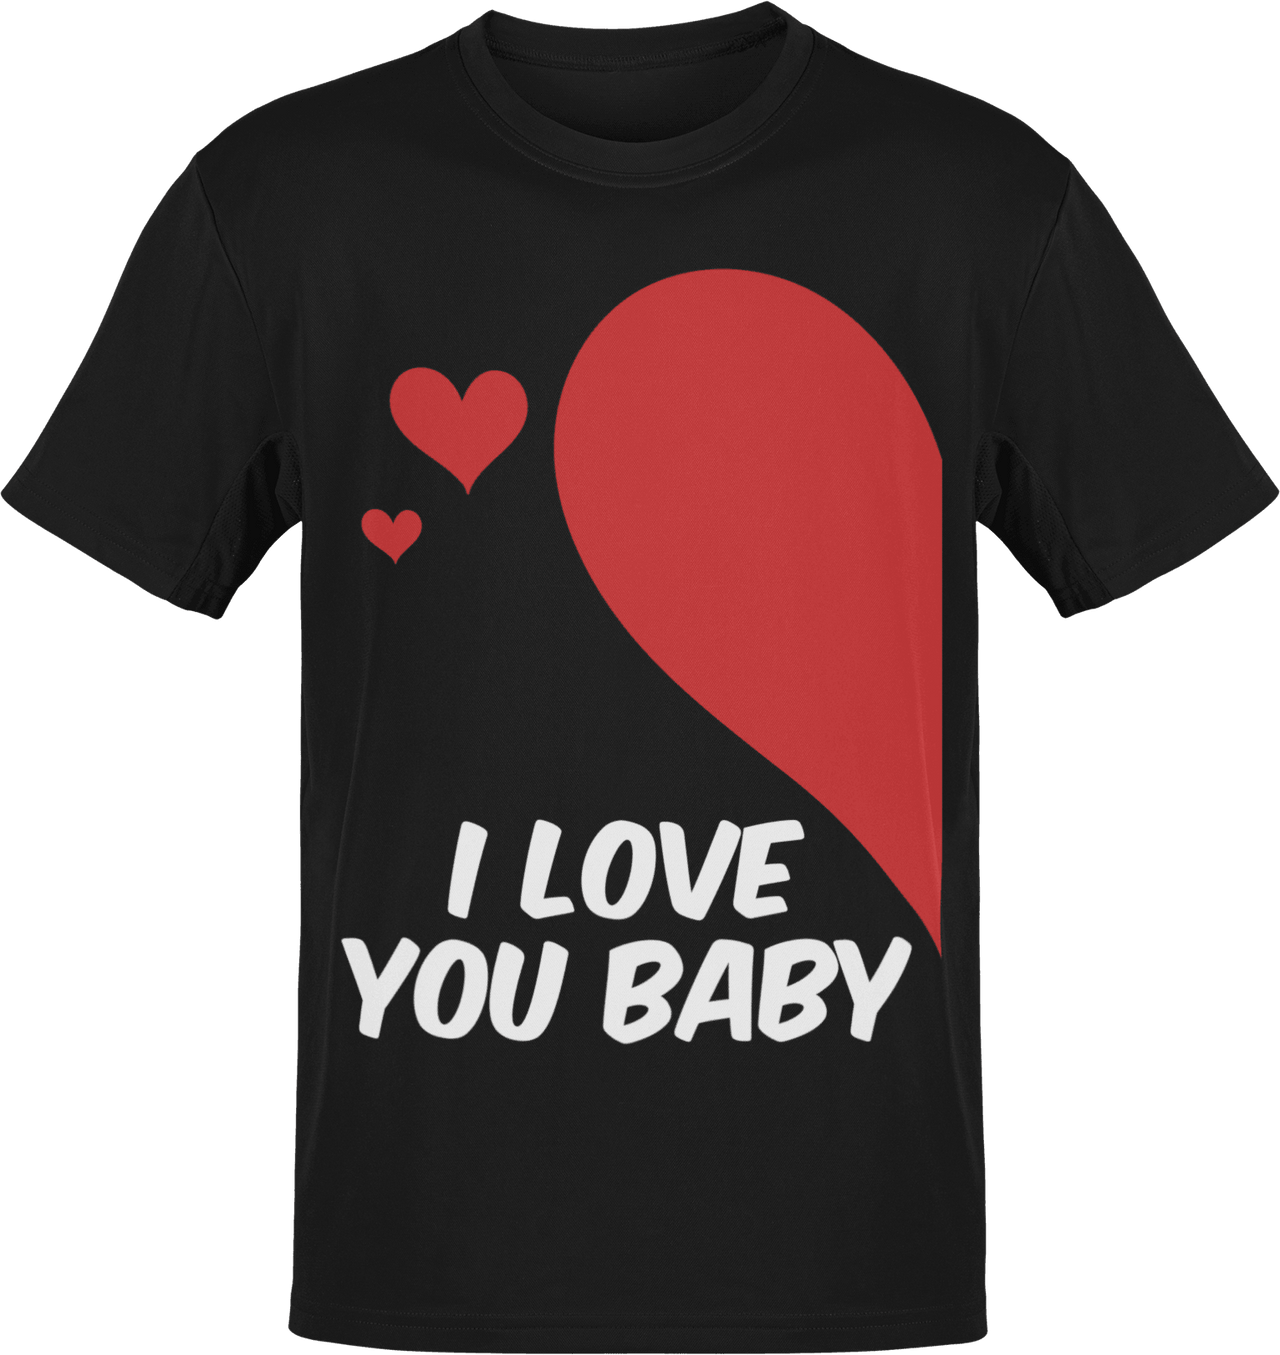 Valentines I Love You Baby Adult Right Graphic T-Shirt For Men 8Ball